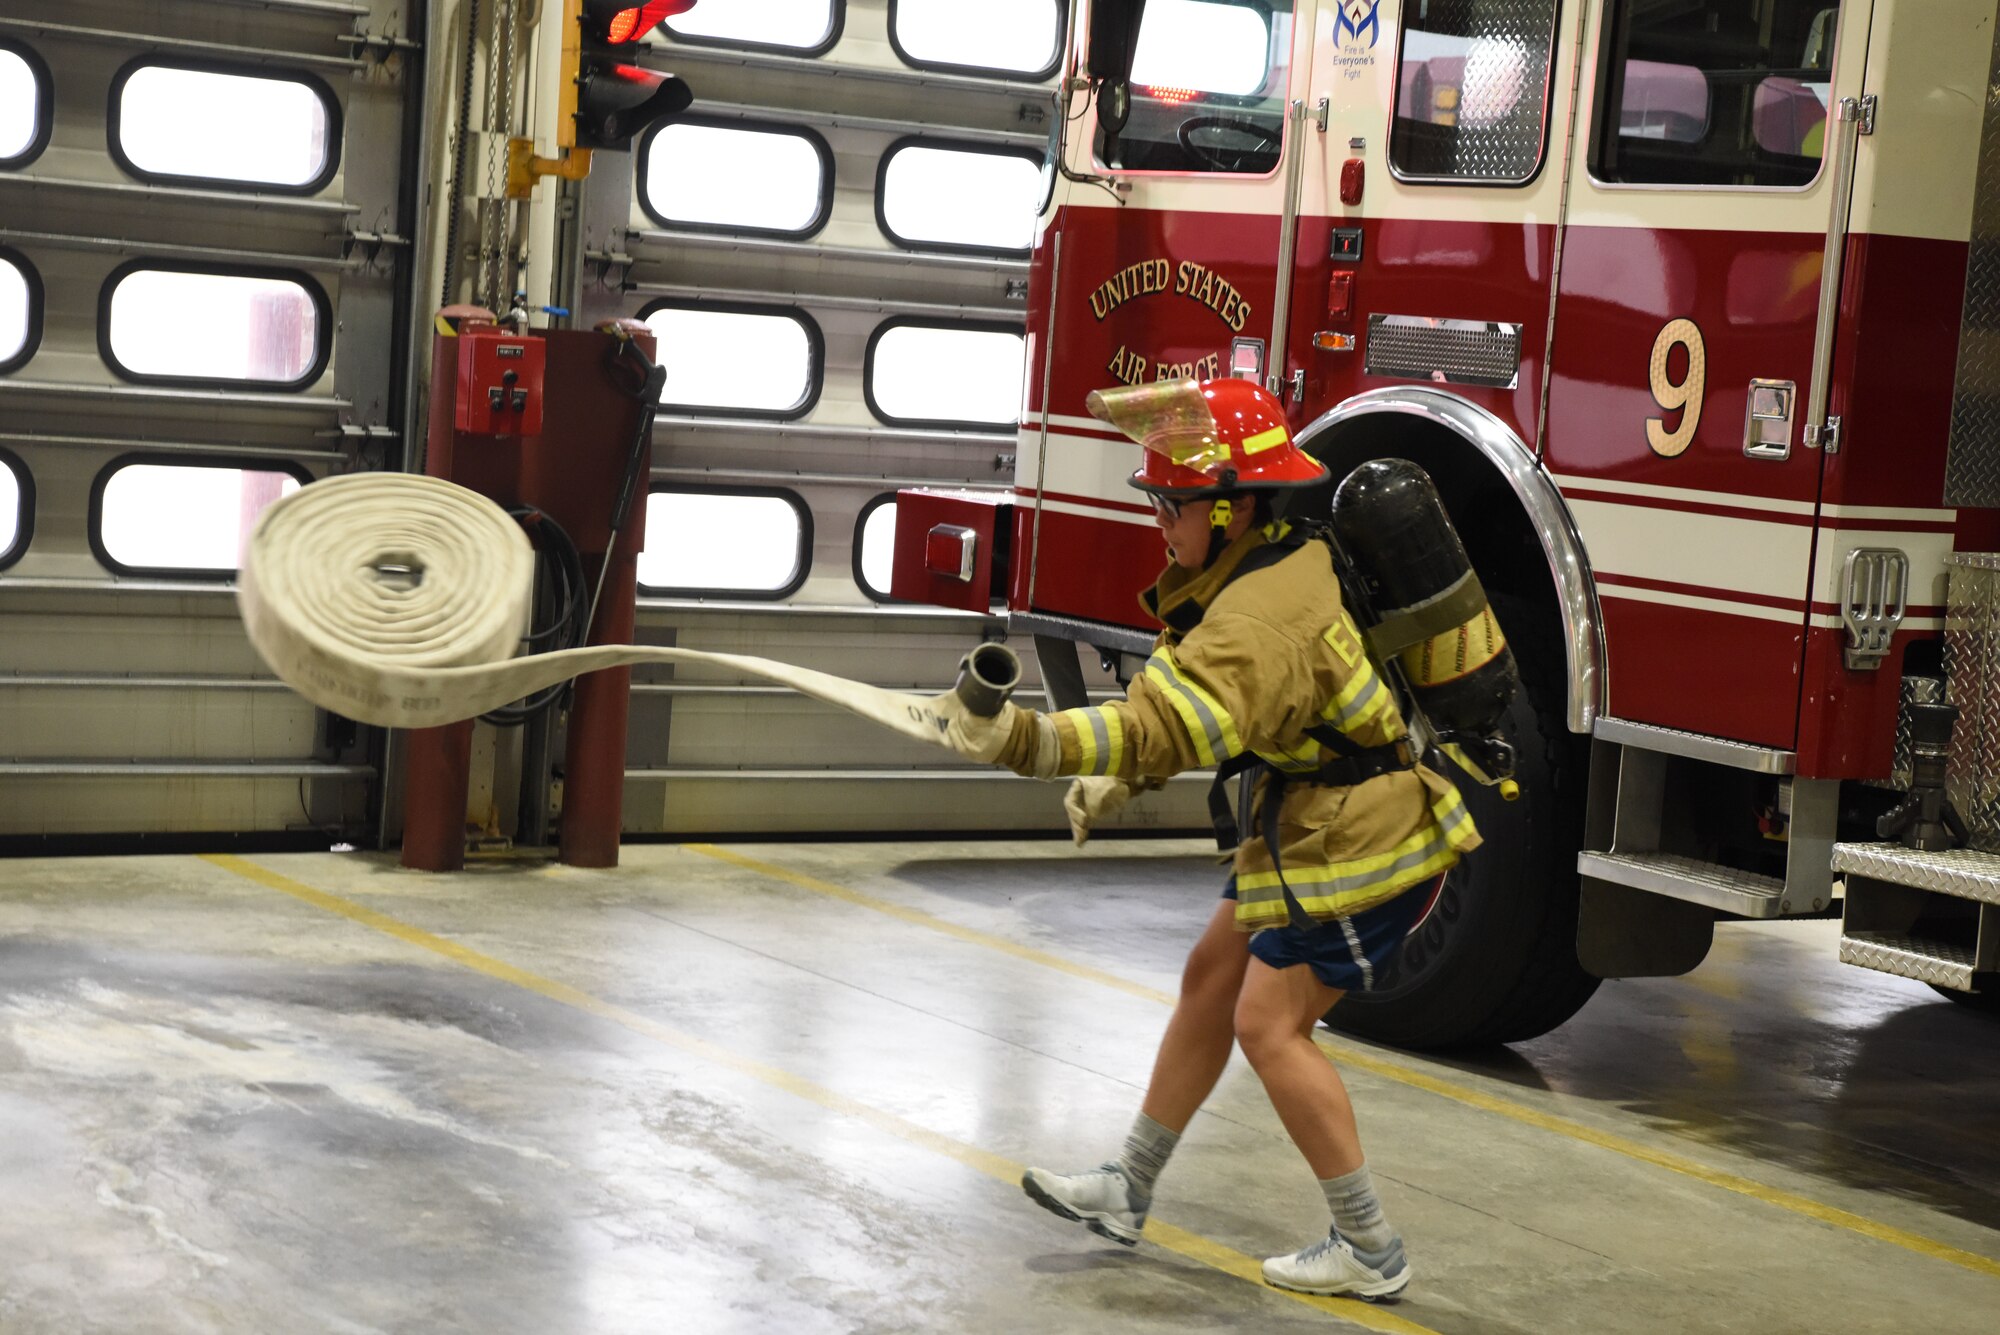 Airman 1st Class Michelle Medina, a 28th Logistics Readiness Squadron fuels facility operator, unravels a hose during the Firefighter Challenge at Ellsworth Air Force Base, S.D., Oct. 5, 2018. The challenge was one many events hosted by the 28th Civil Engineer Squadron fire protection flight during National Fire Prevention and Safety Week. (U.S. Air Force photo by Airman 1st Class Thomas Karol)